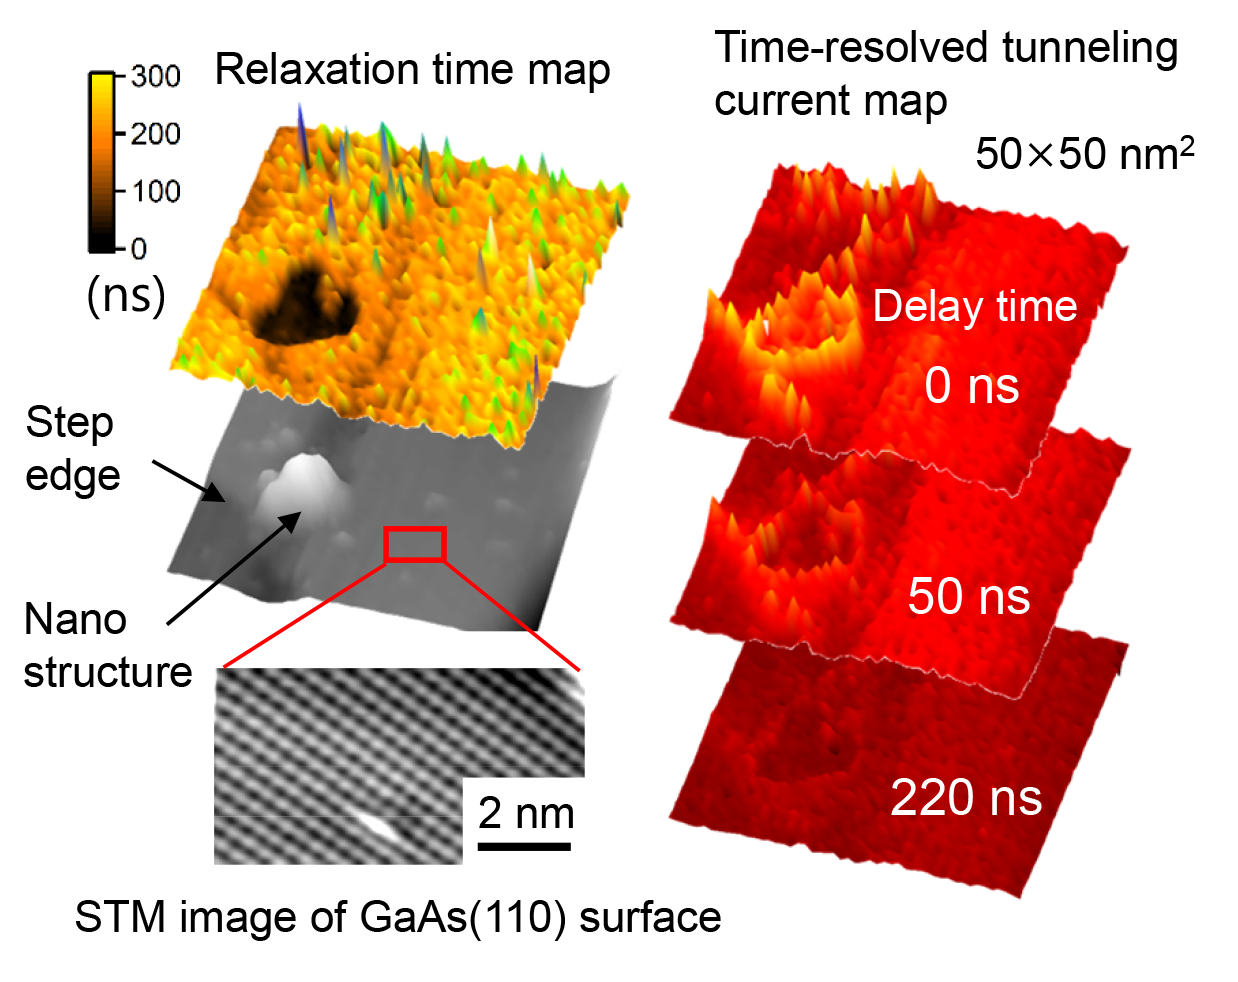 Relaxation time mapping of GaAs(110) surface (T = 6 K)